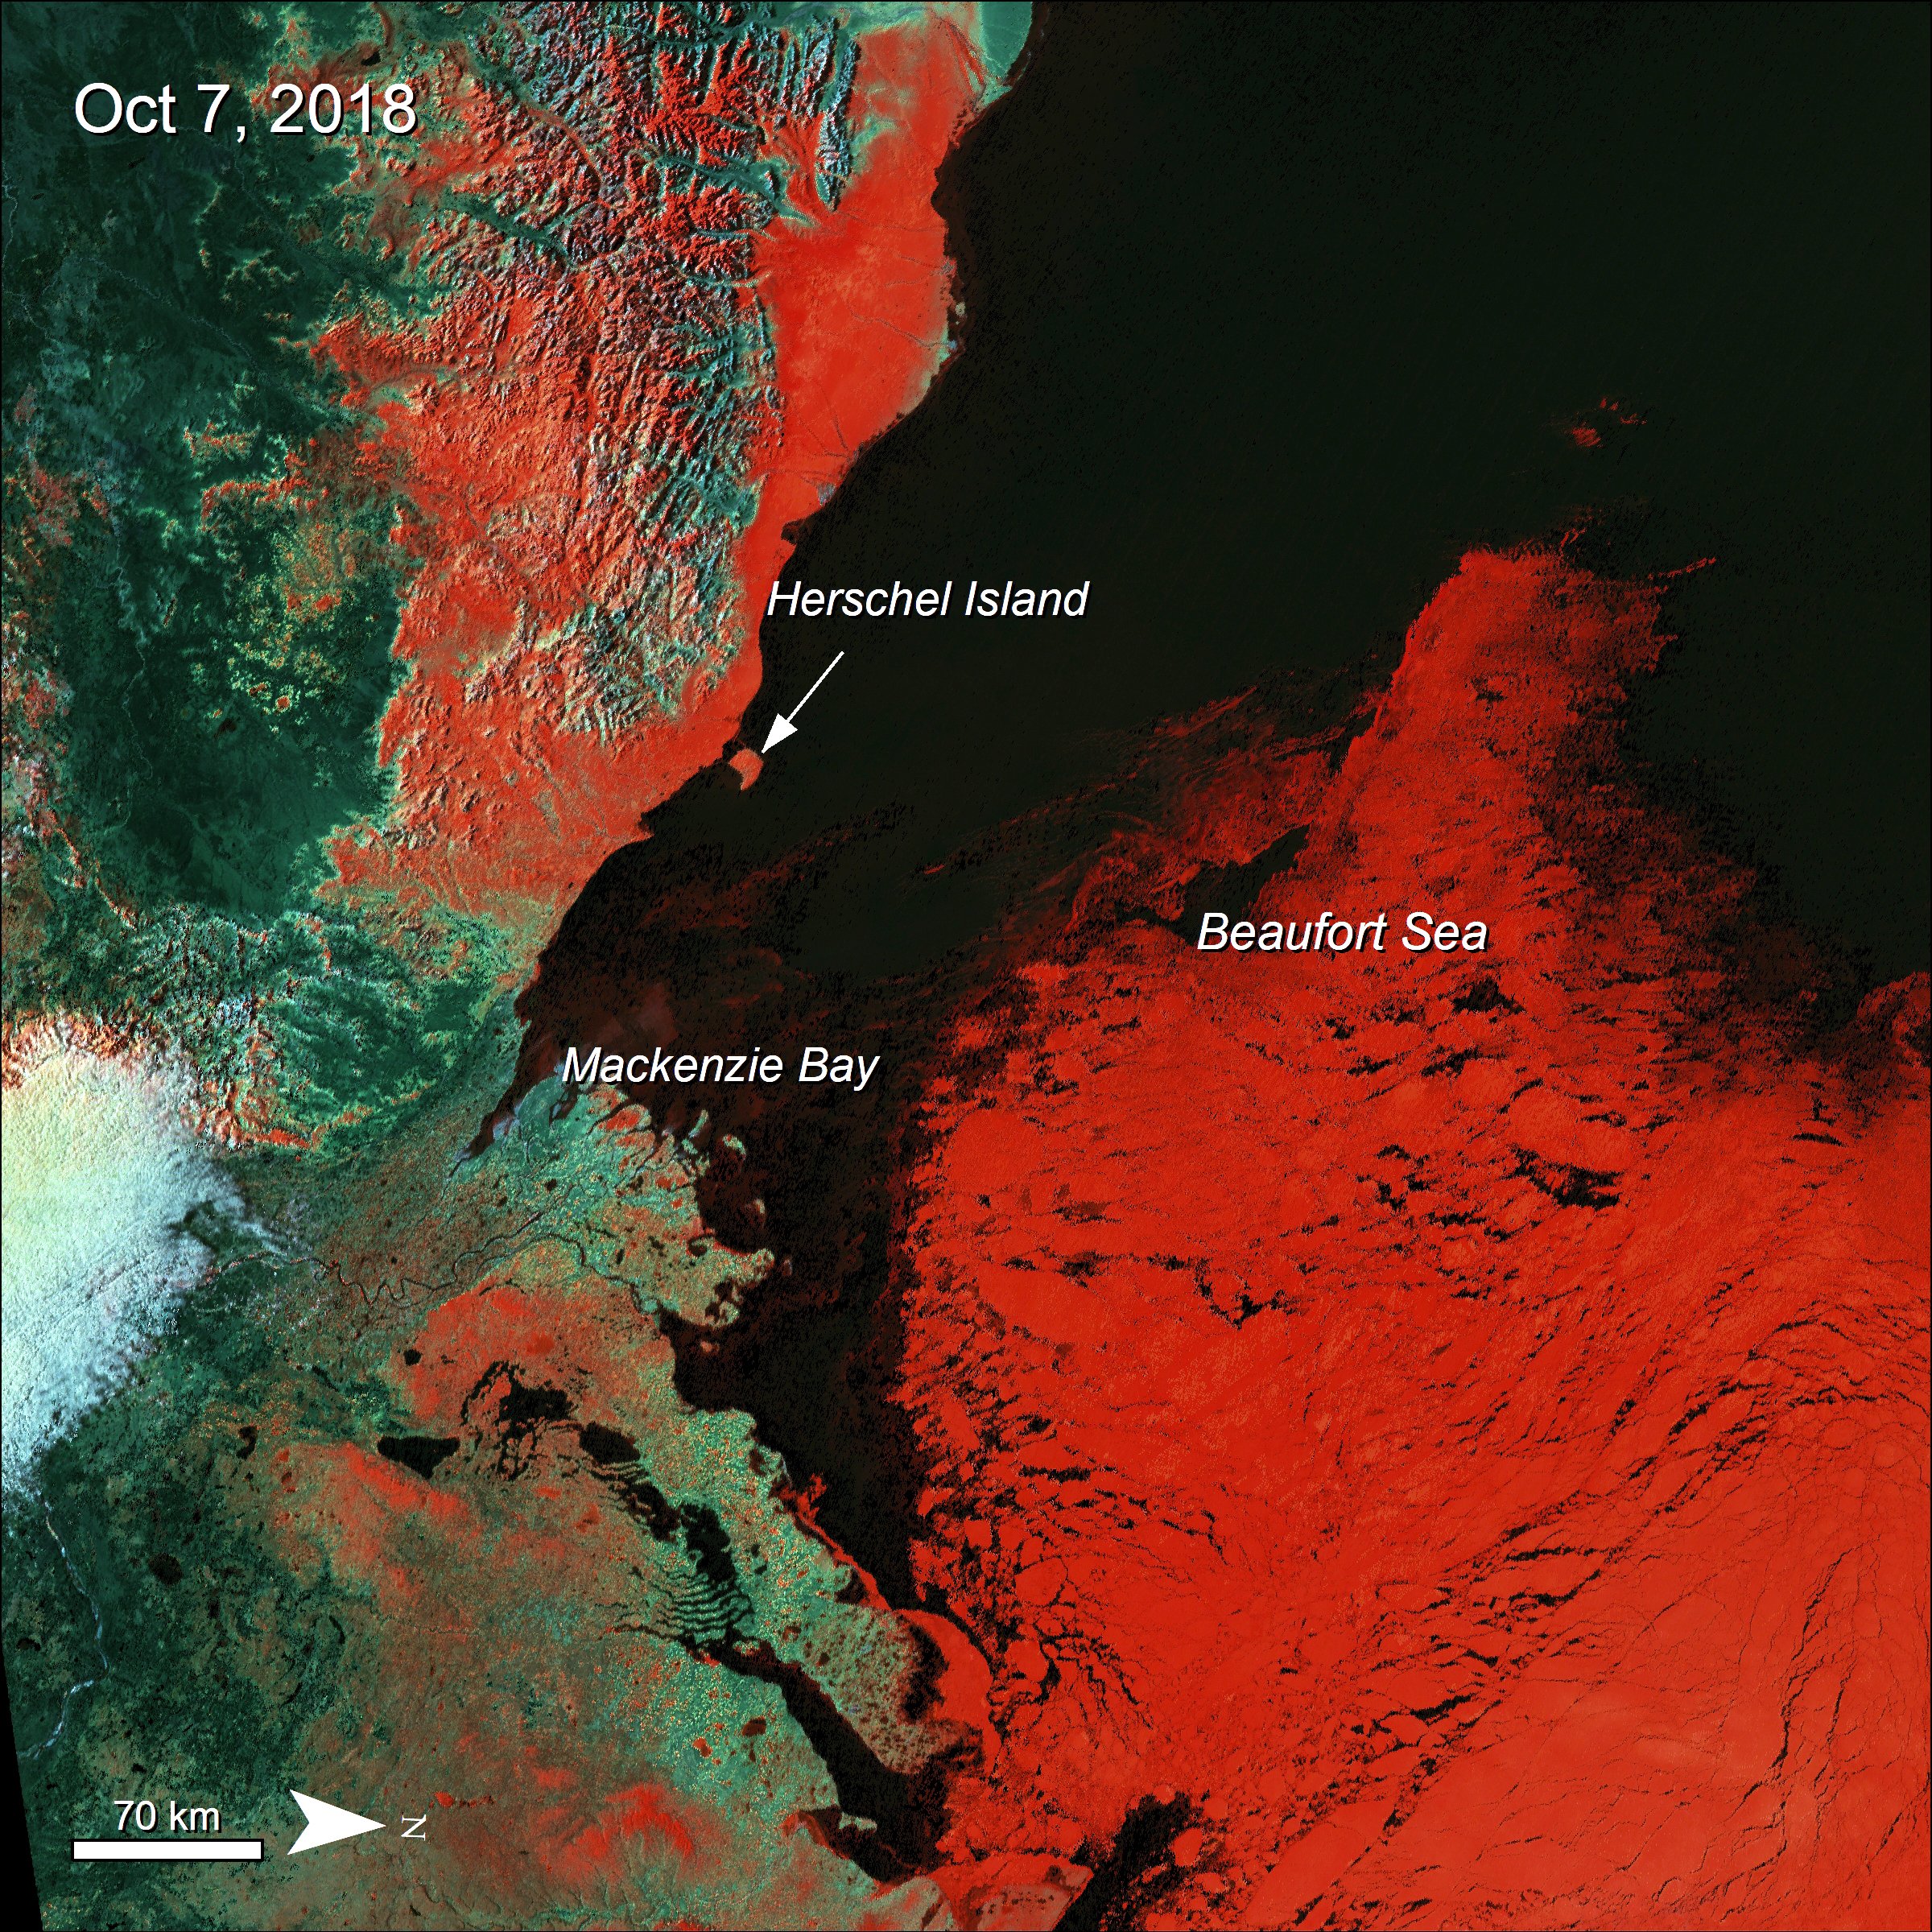 Terra MODIS Surface Reflectance data over the Beaufort Sea, Canada showing sea ice in red.